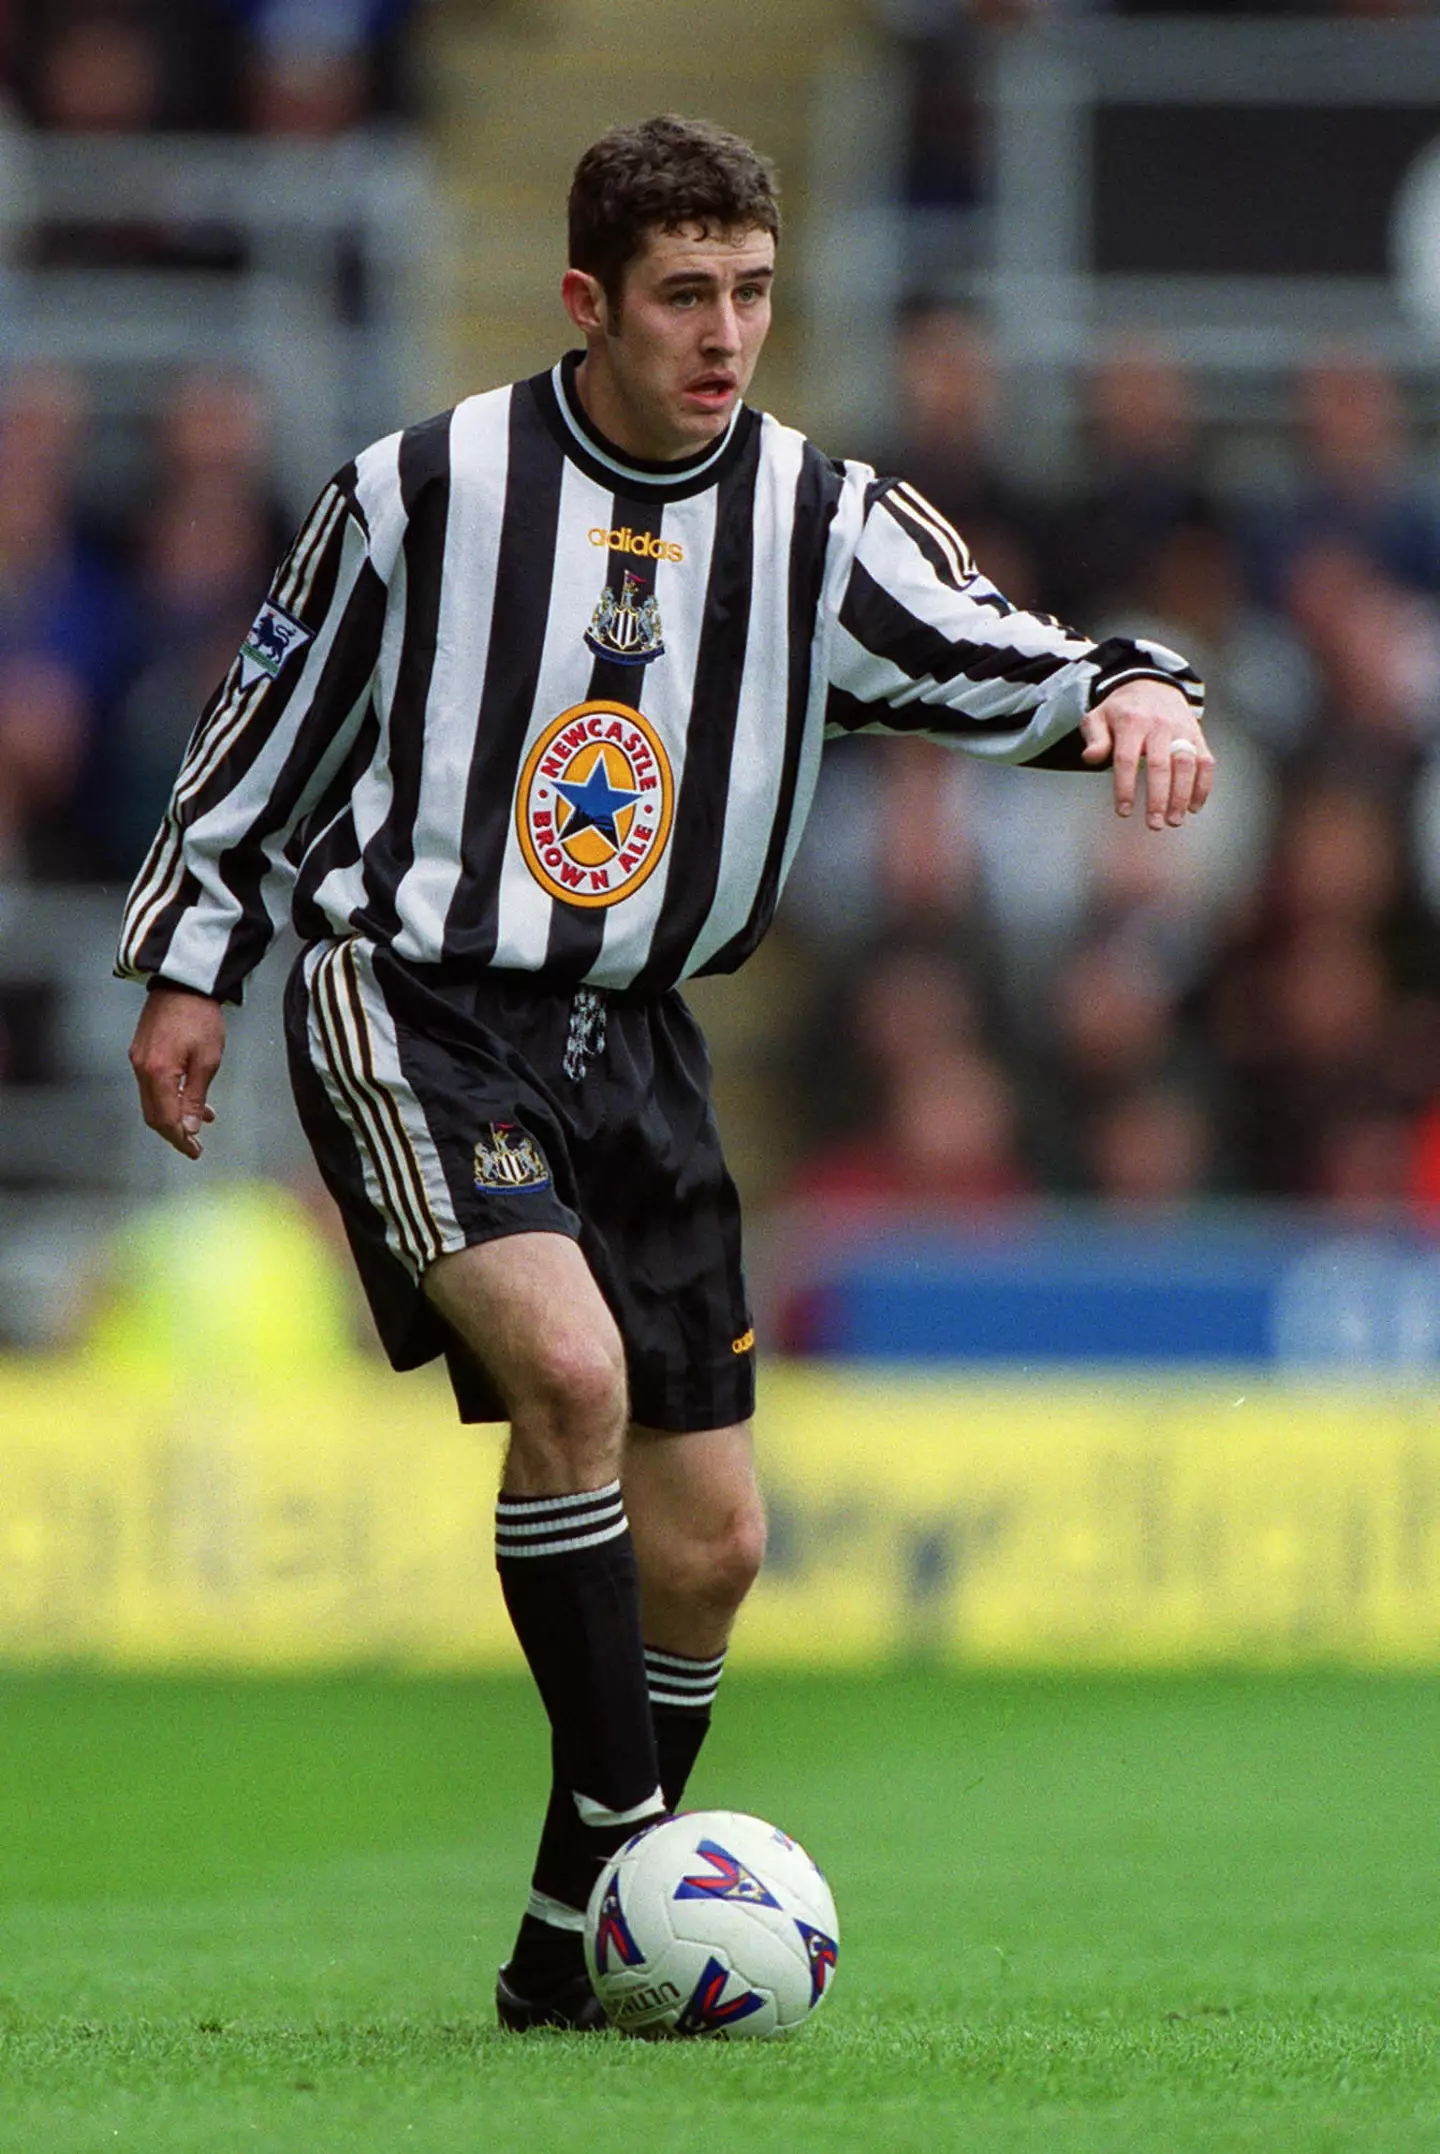 Griffin spent six years at Newcastle before leaving for Portsmouth in 2004 (Image: PA)